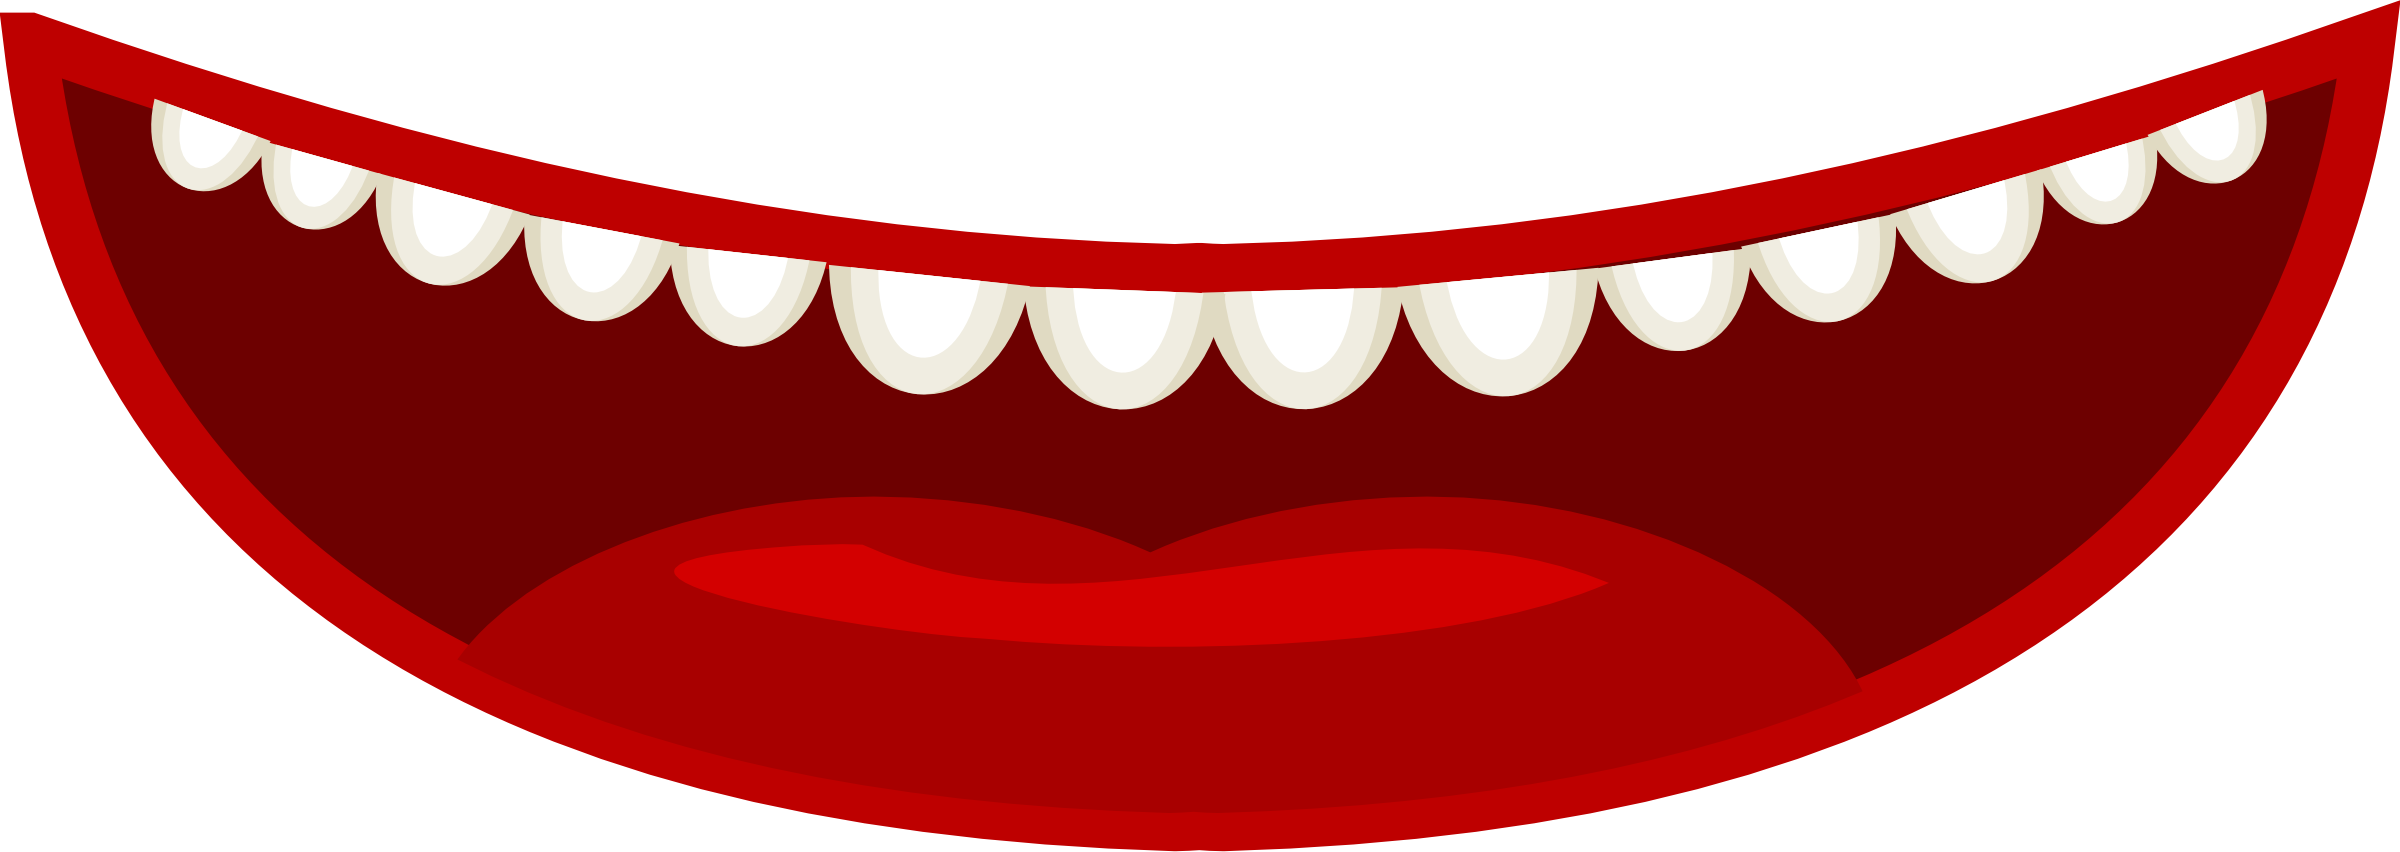 clipart boy mouth